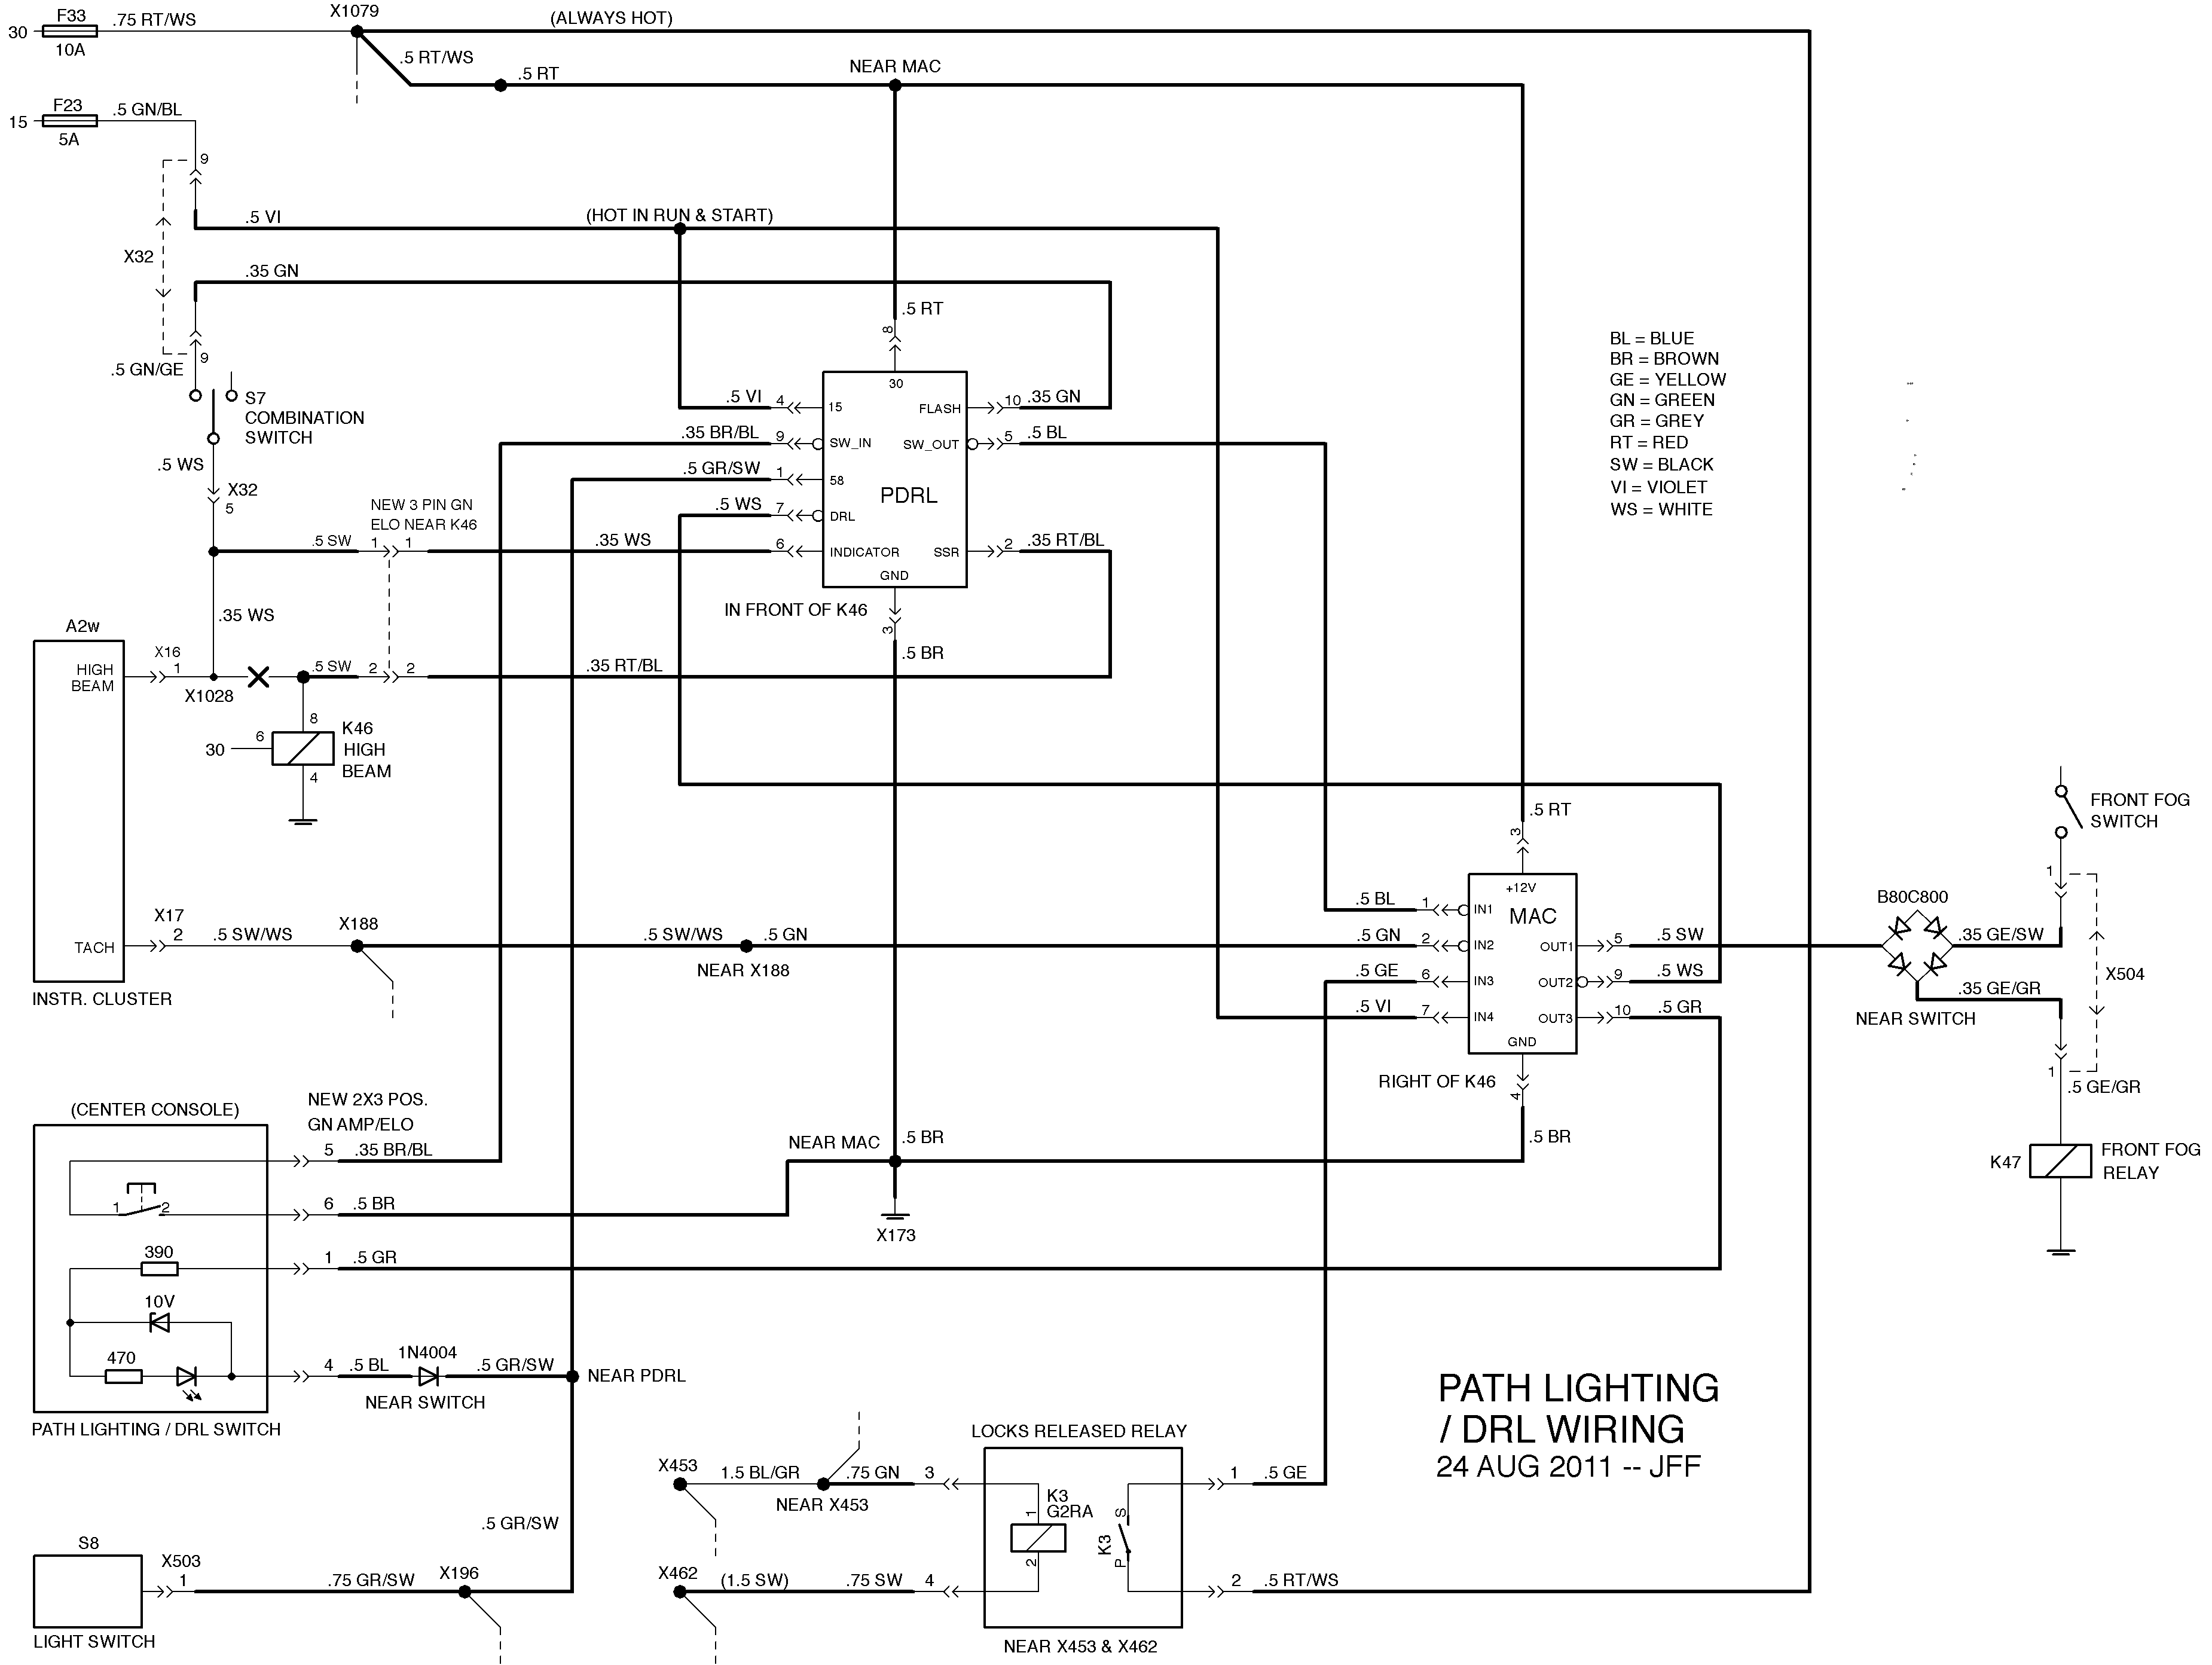 wiring diagram 1999 bmw m3 alpine alarm with 30 pin connector